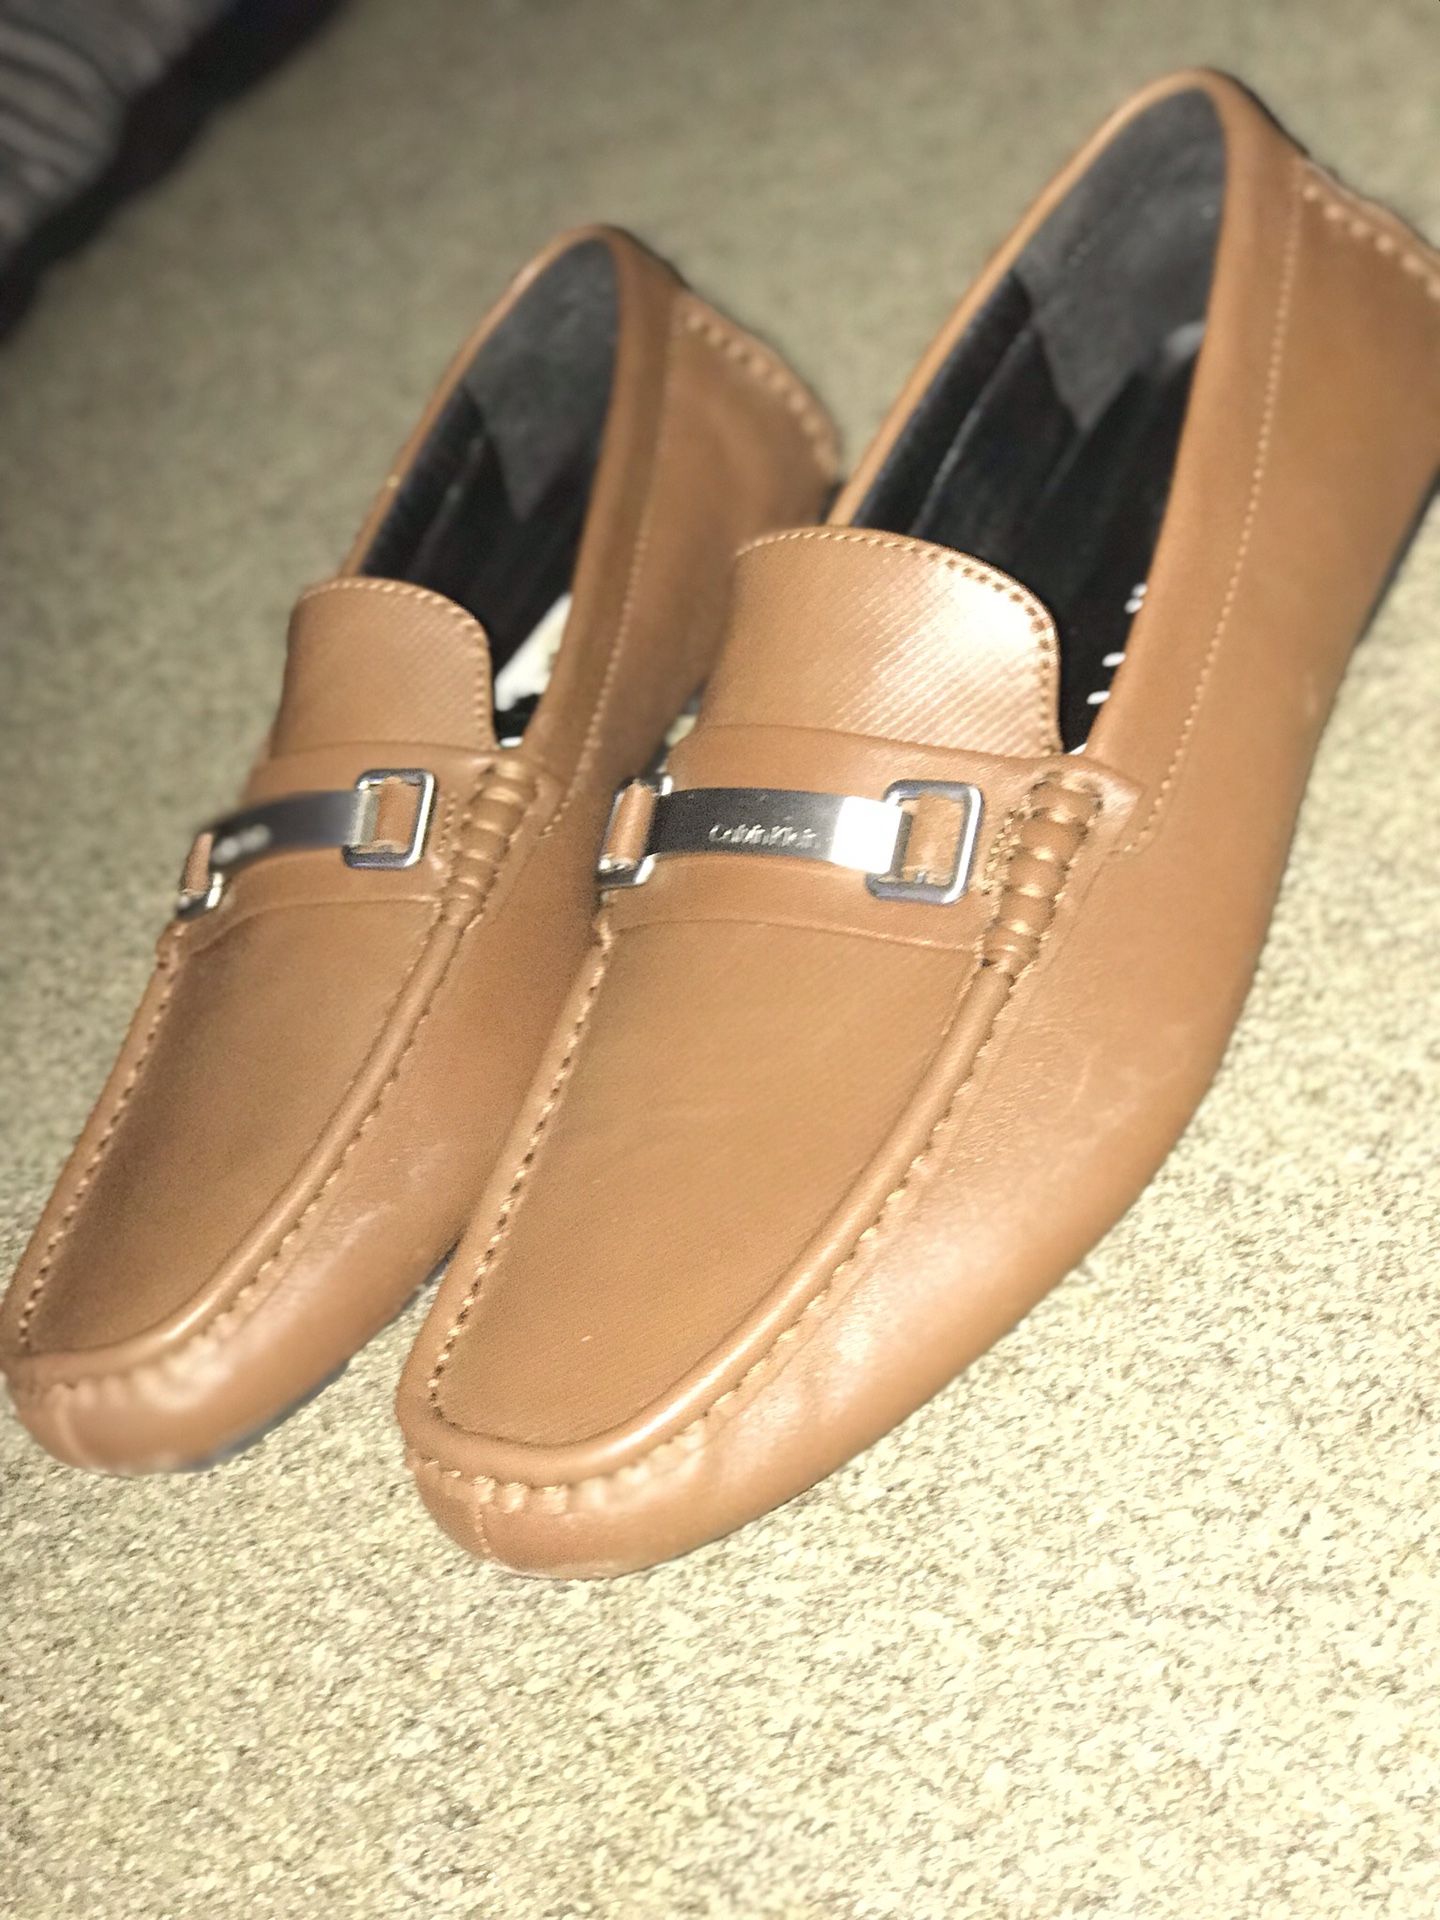 Brown Calvin Klein’s Size 11 Worn Once & Selling Very Cheap 40$